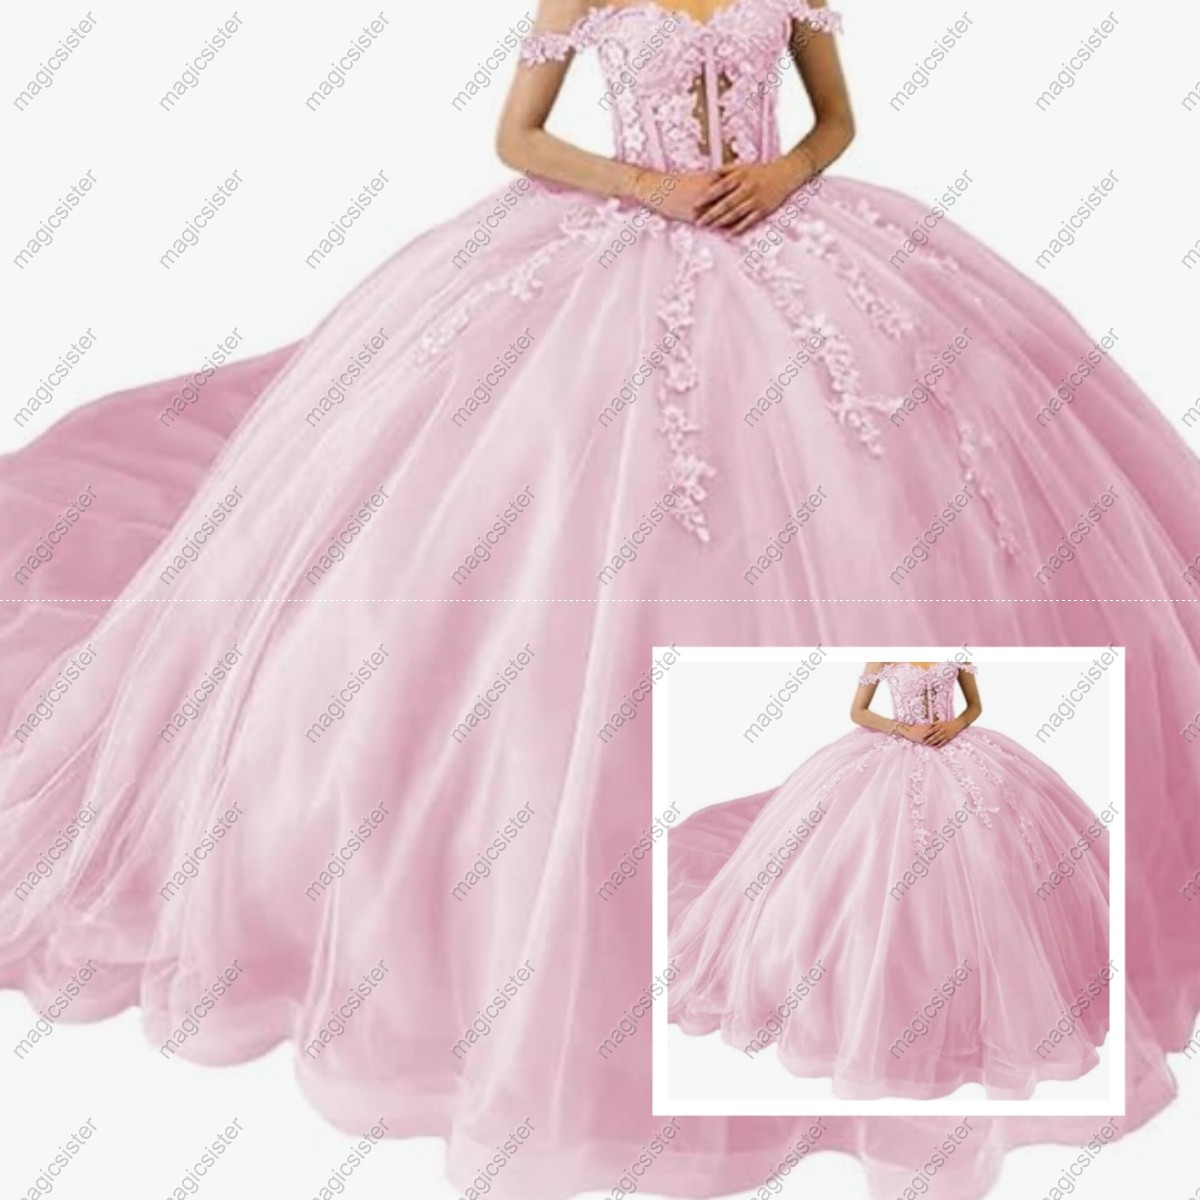 Blush Princess Quinceanera Dresses Beaded Prom Ball Gowns